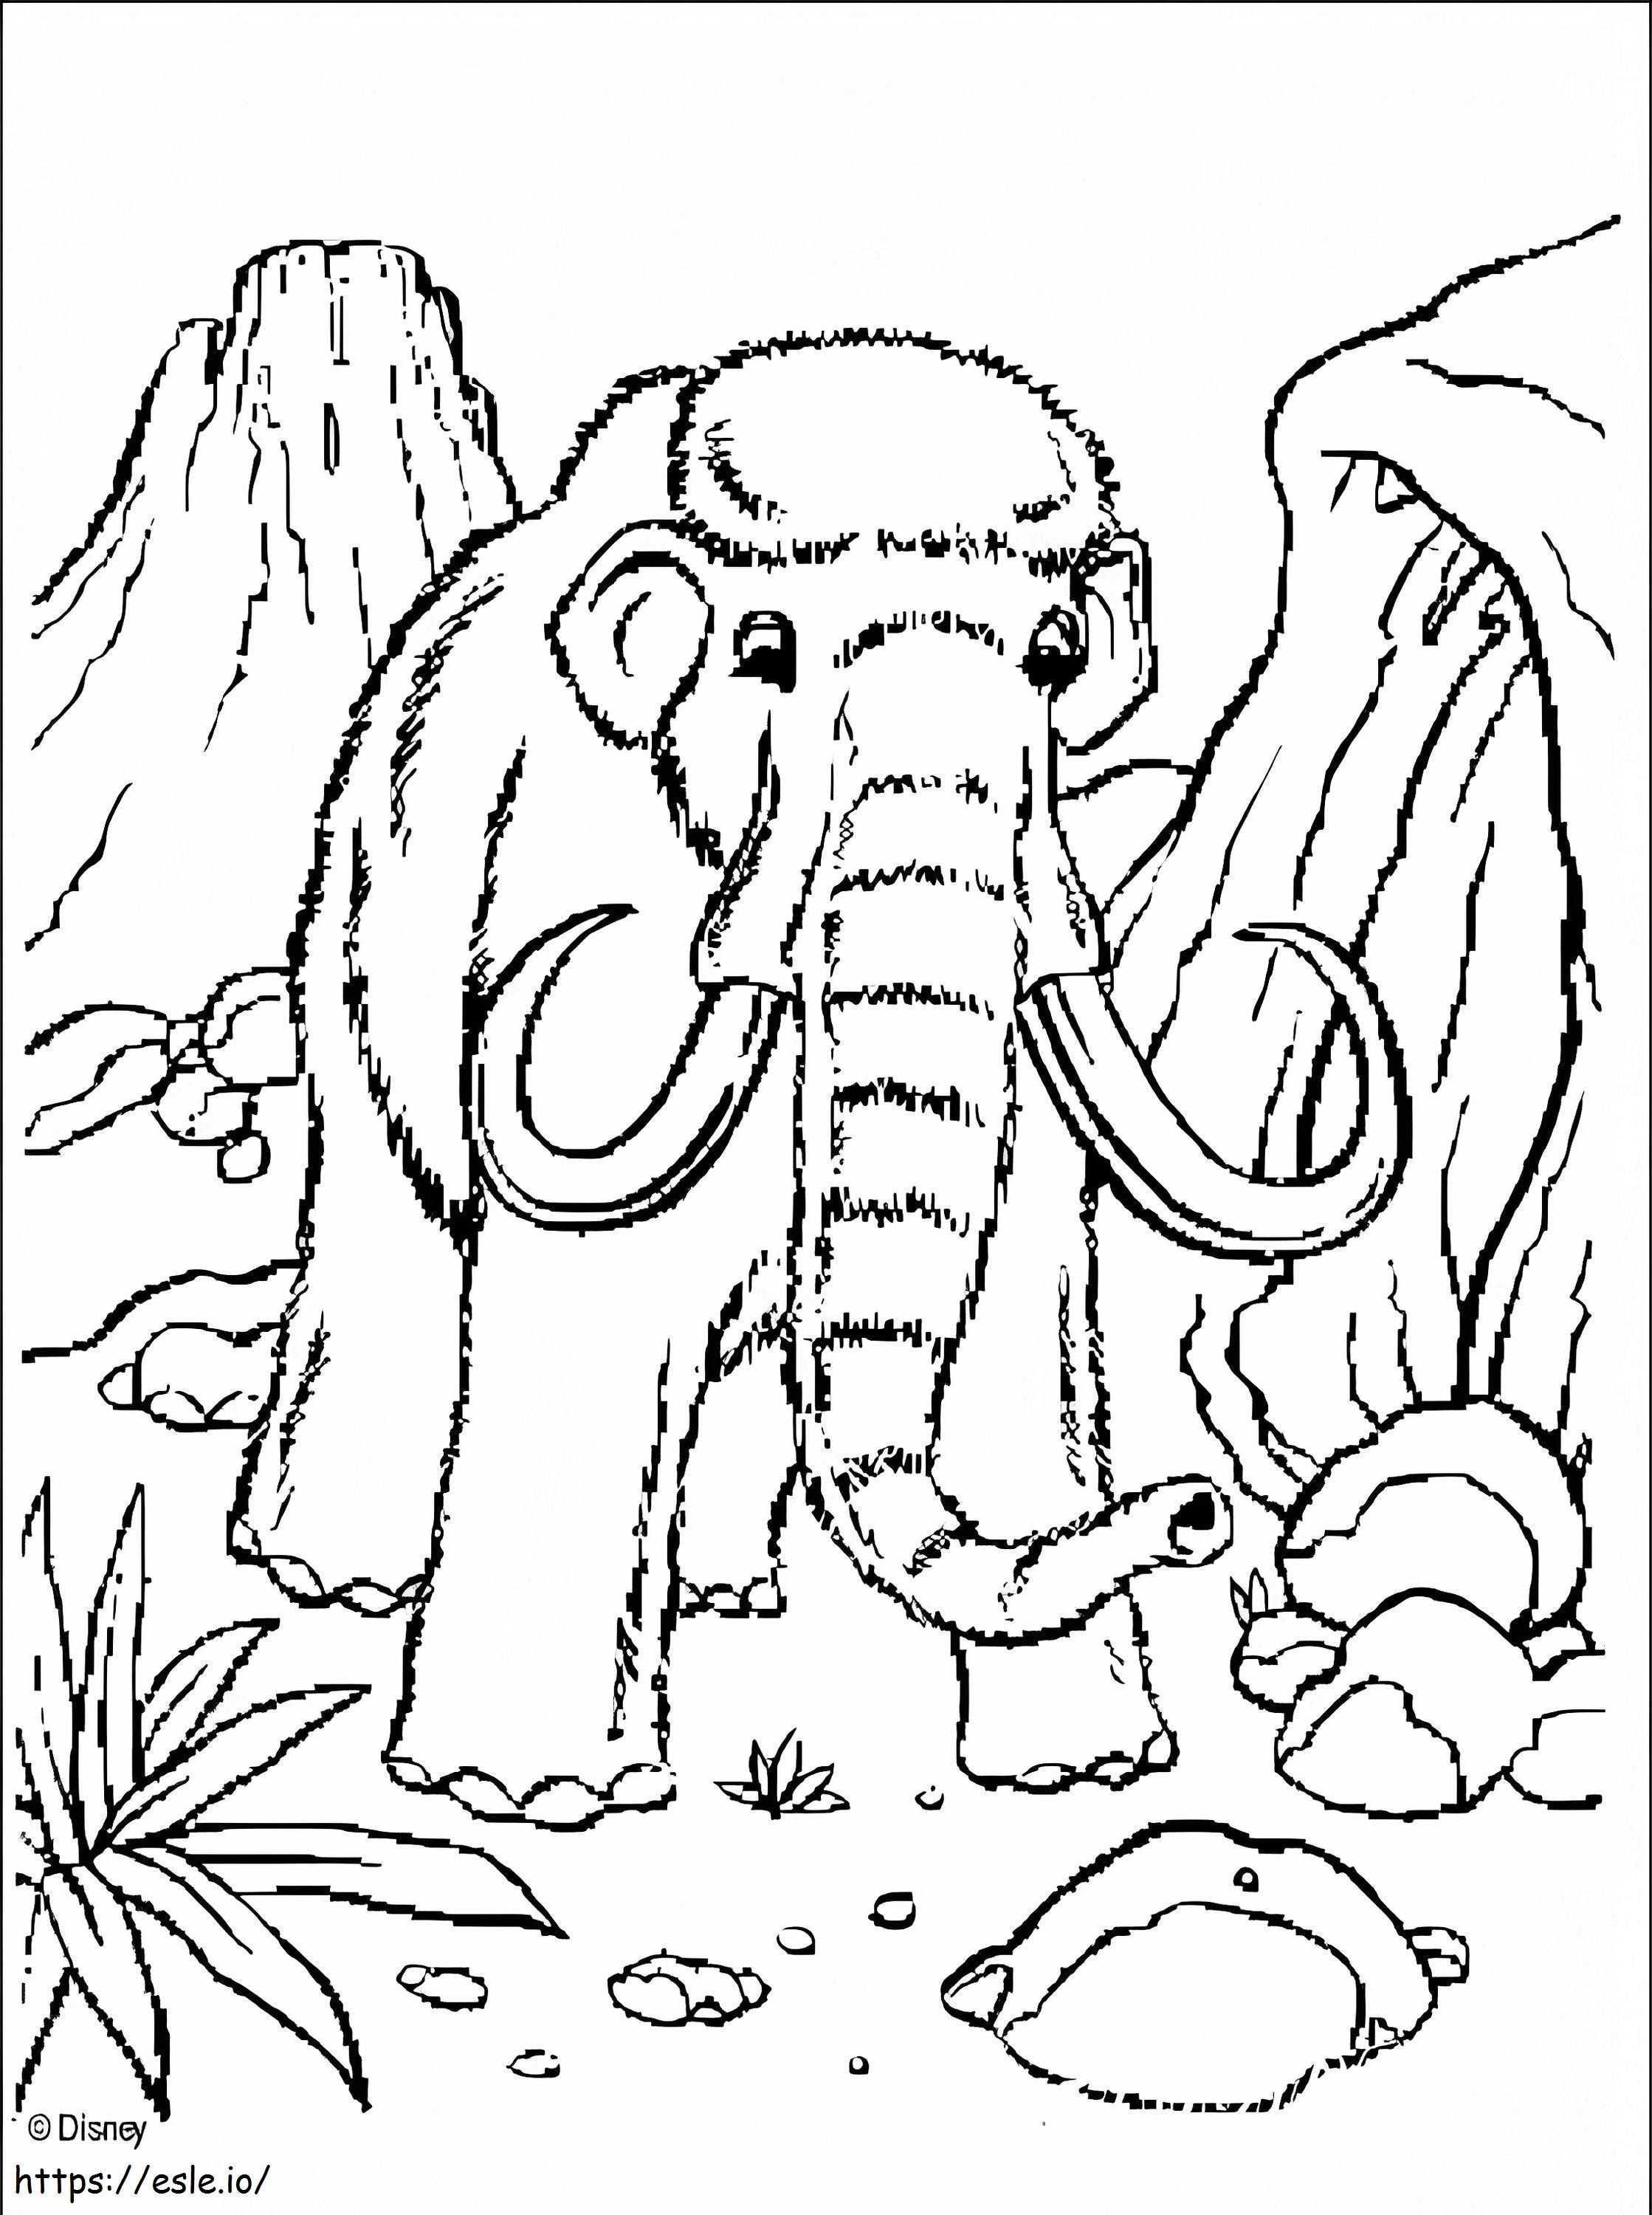 Walking Mammoth coloring page